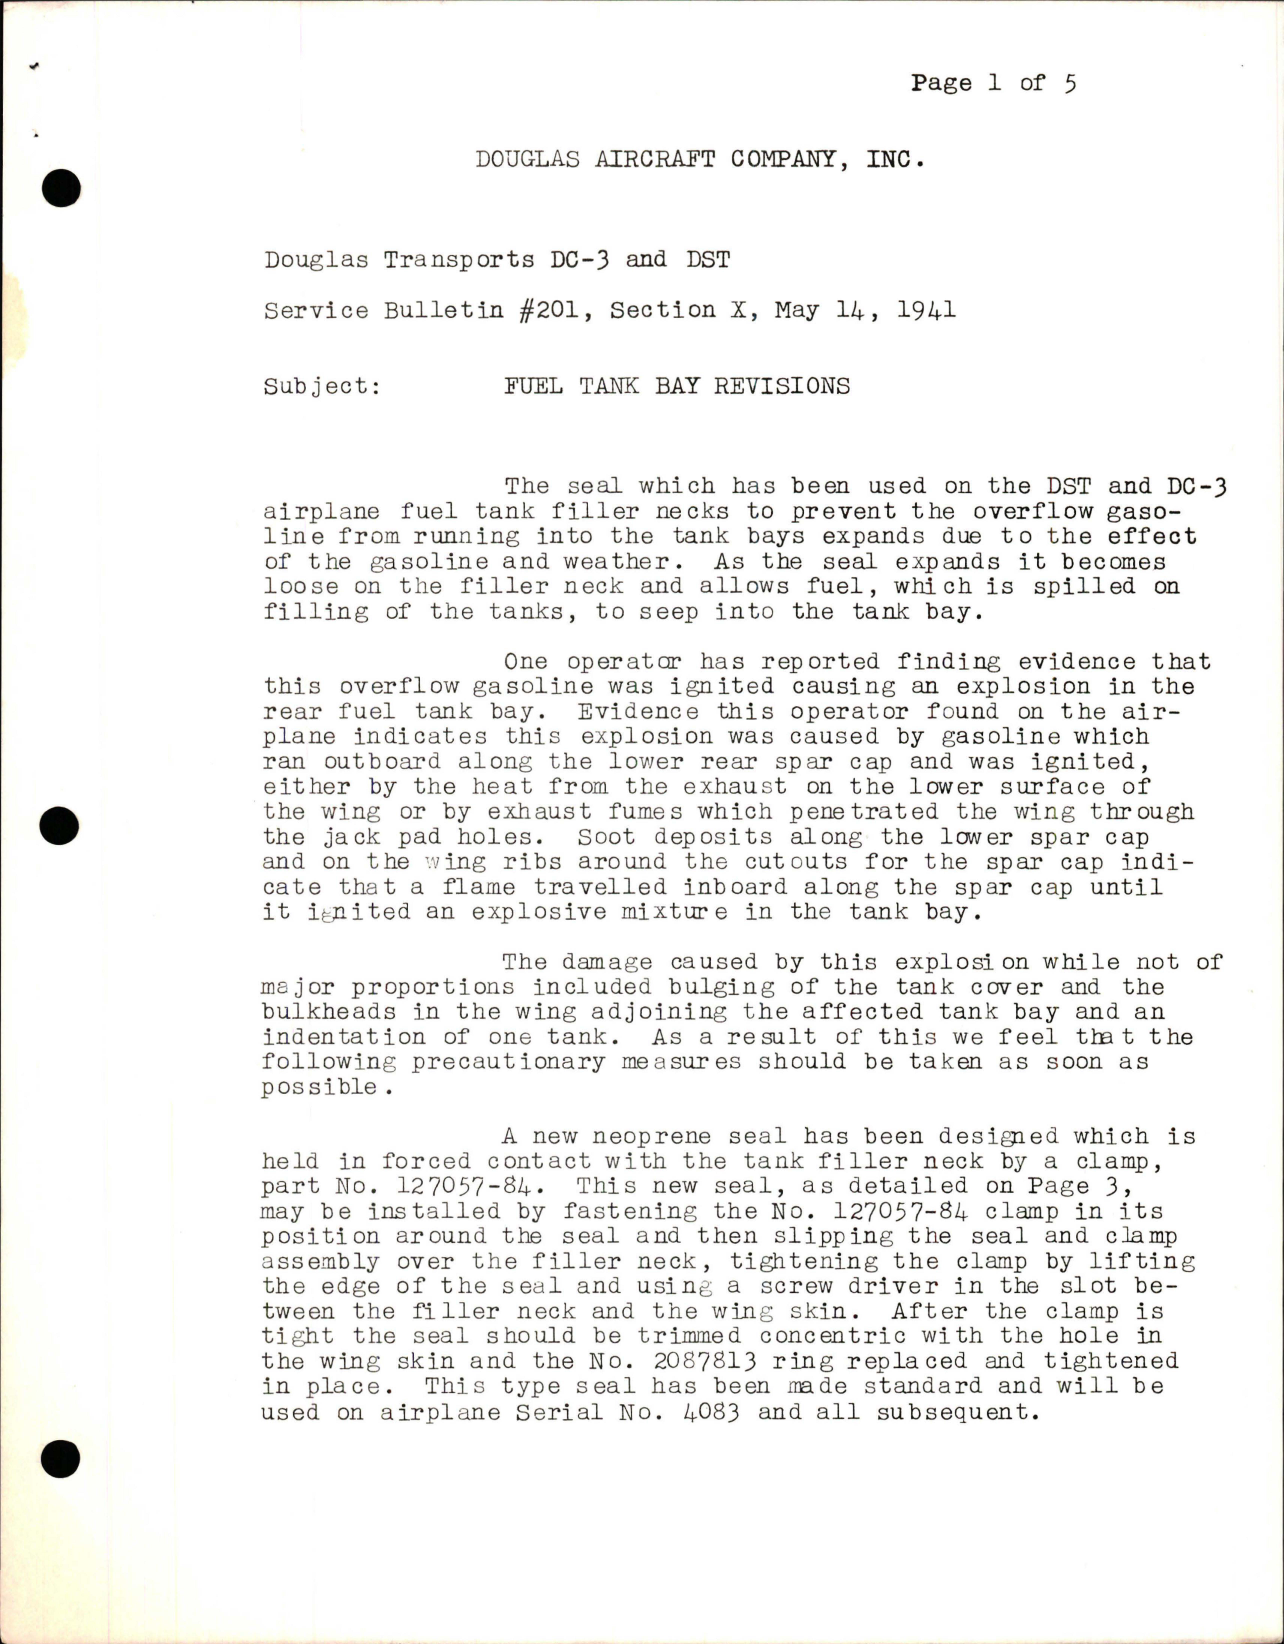 Sample page 1 from AirCorps Library document: Fuel Tank Bay Revisions